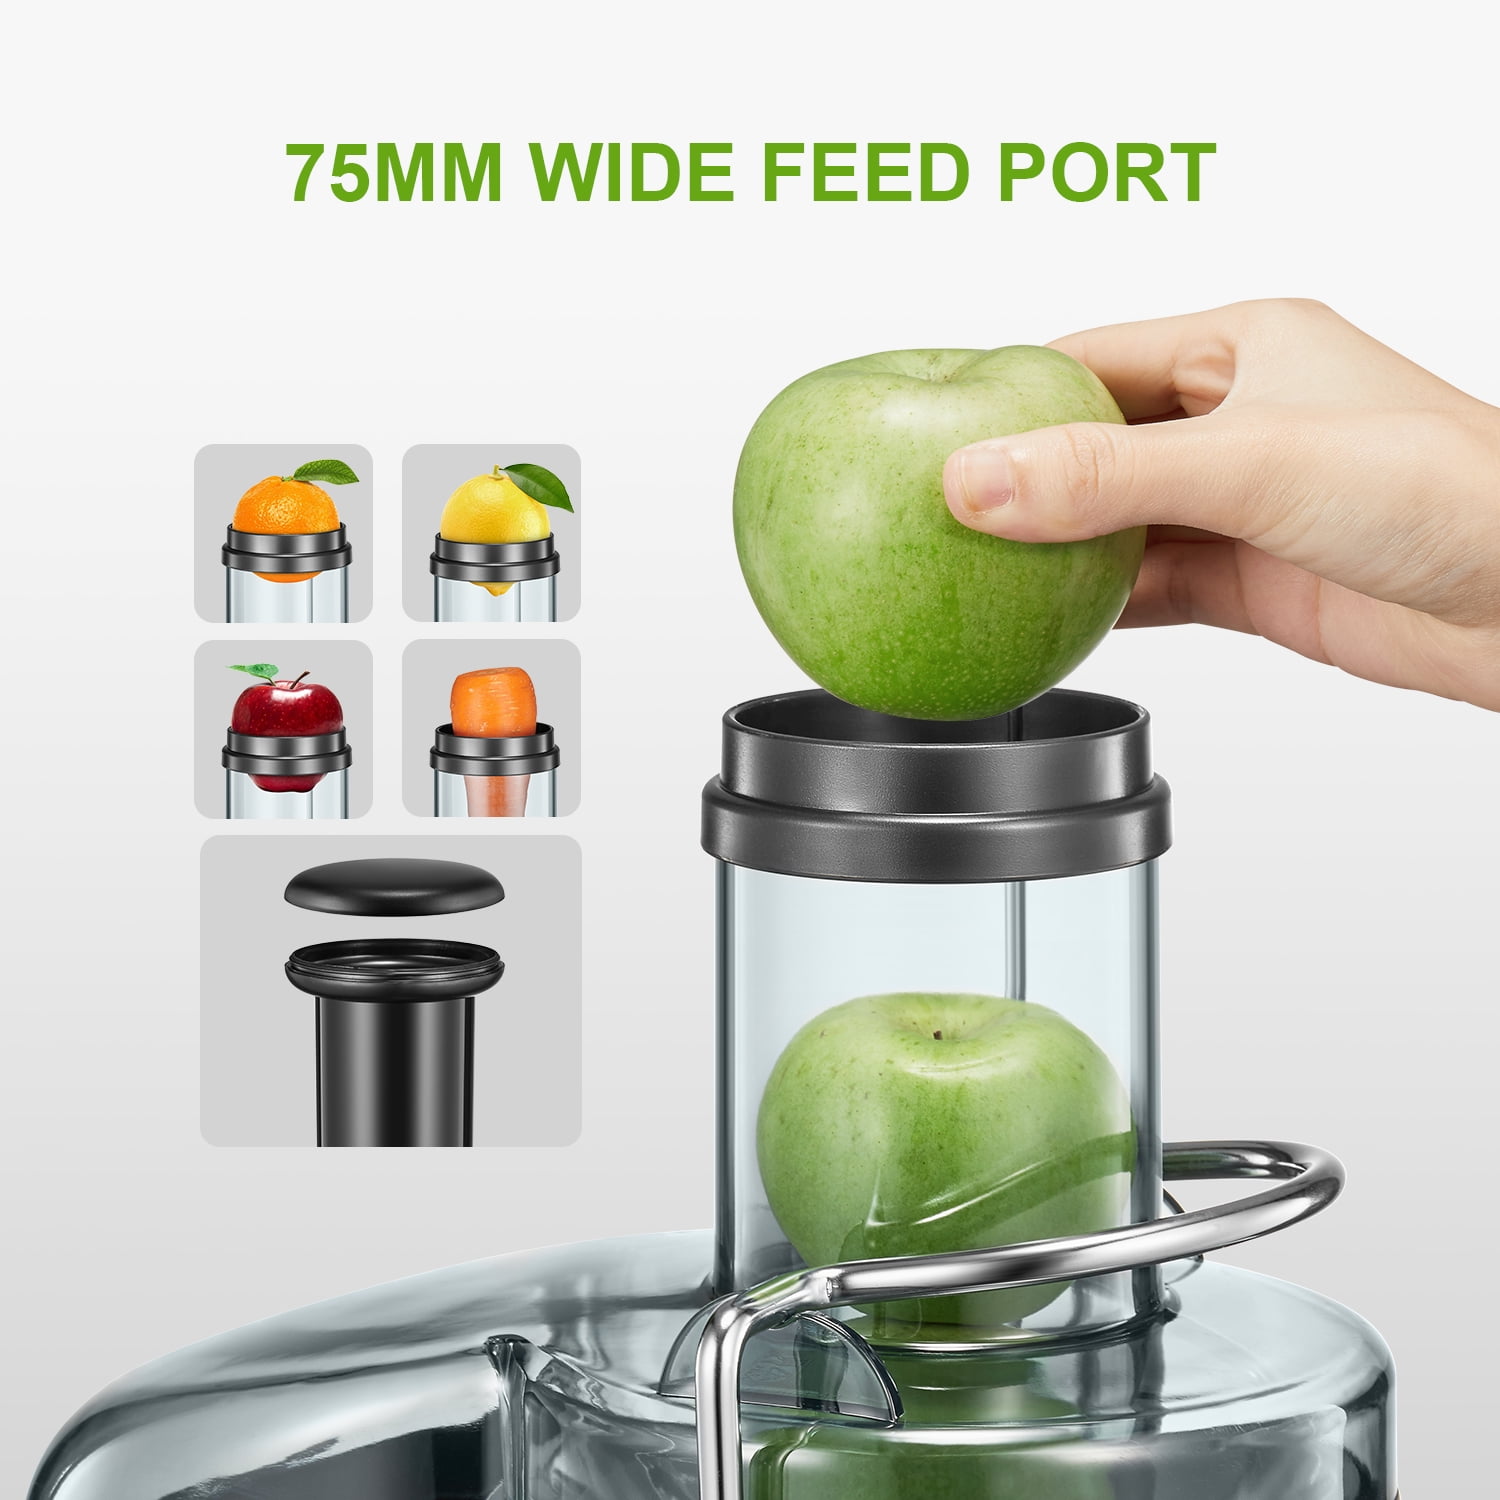 Zell Juicer With 800W Motor, Juicer Machine With 3 Feed Chute, Dual Speeds  Juice Maker For Fruits And Veggies, AntiDrip Function Centrifugal Juicer,  Include Cleaning Brush, BpaFree, White 